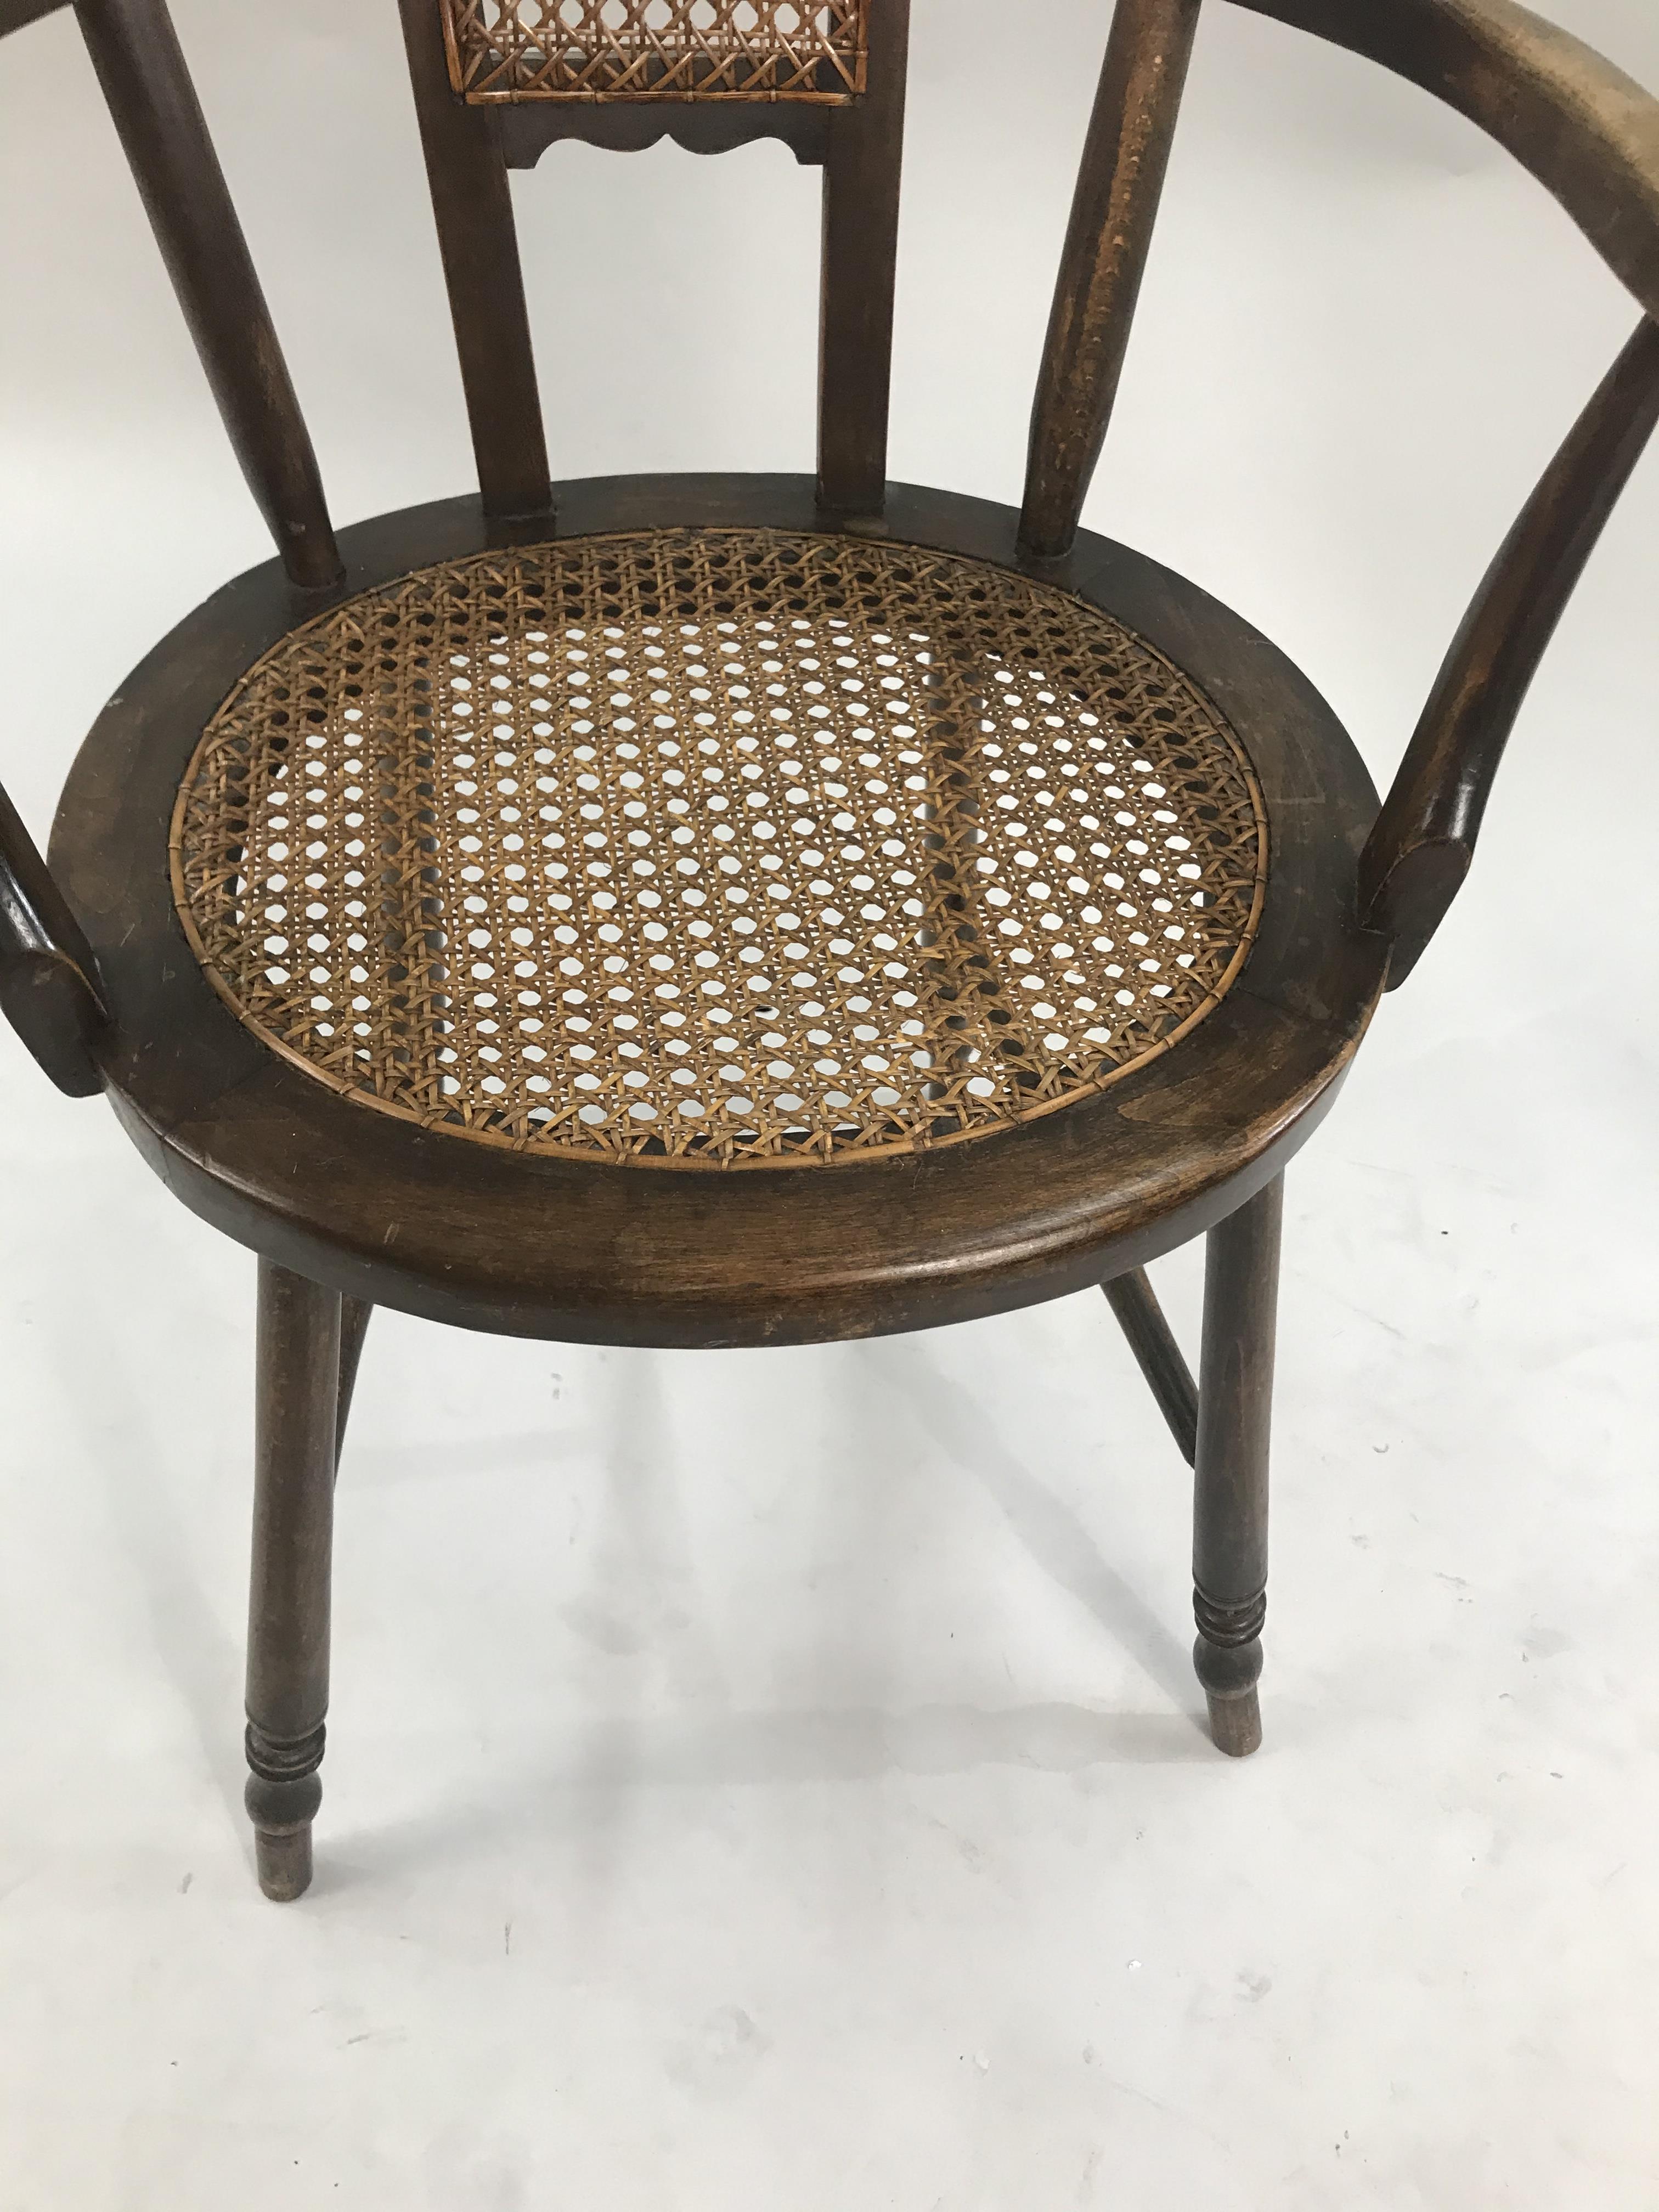 Antique Bergere Cane Armchair - Image 4 of 7